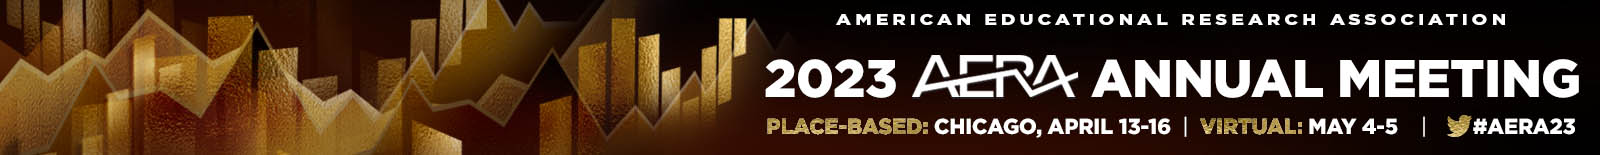 2023 Annual Meeting Banner image "2023 Annual Meeting, Place-based: Chicago, April 13-16, Virtual: May 4-5, [Twitter logo] #AERA23"